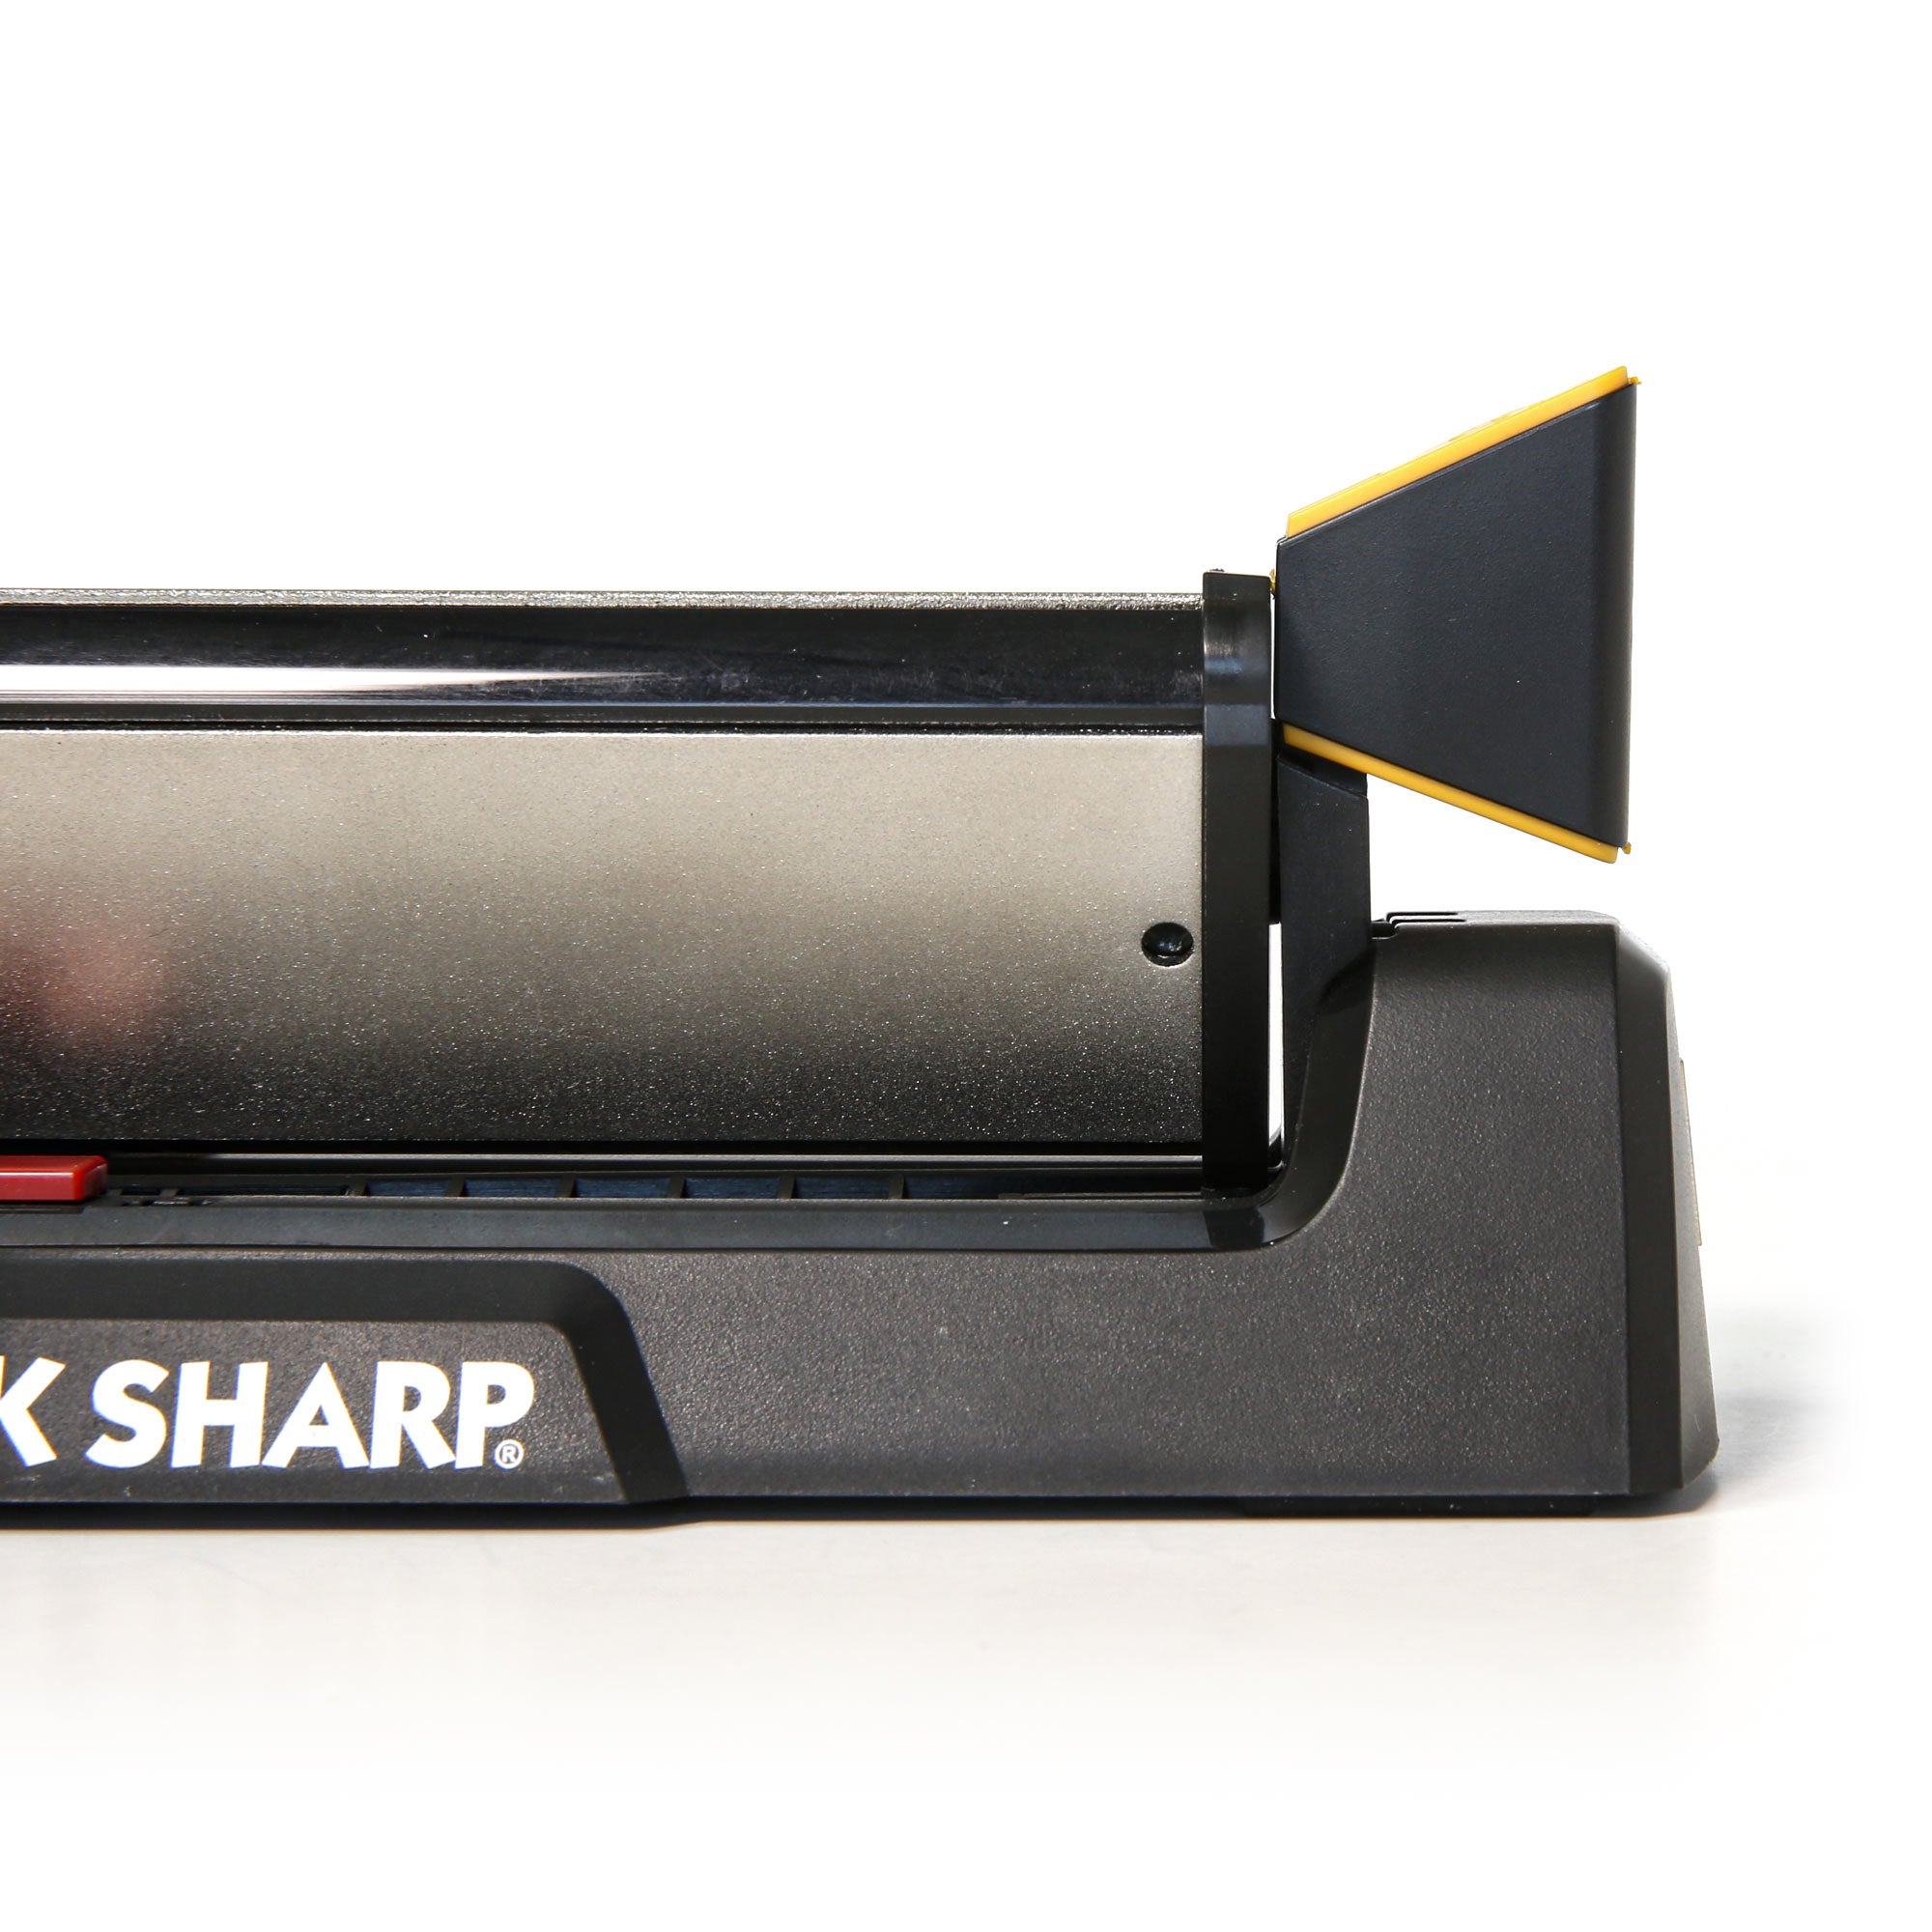  Work Sharp Guided Sharpening System, Diamond and Ceramic Dry  Stone Knife Sharpener for axes, garden tools, knives, without water or oil  Black : Tools & Home Improvement